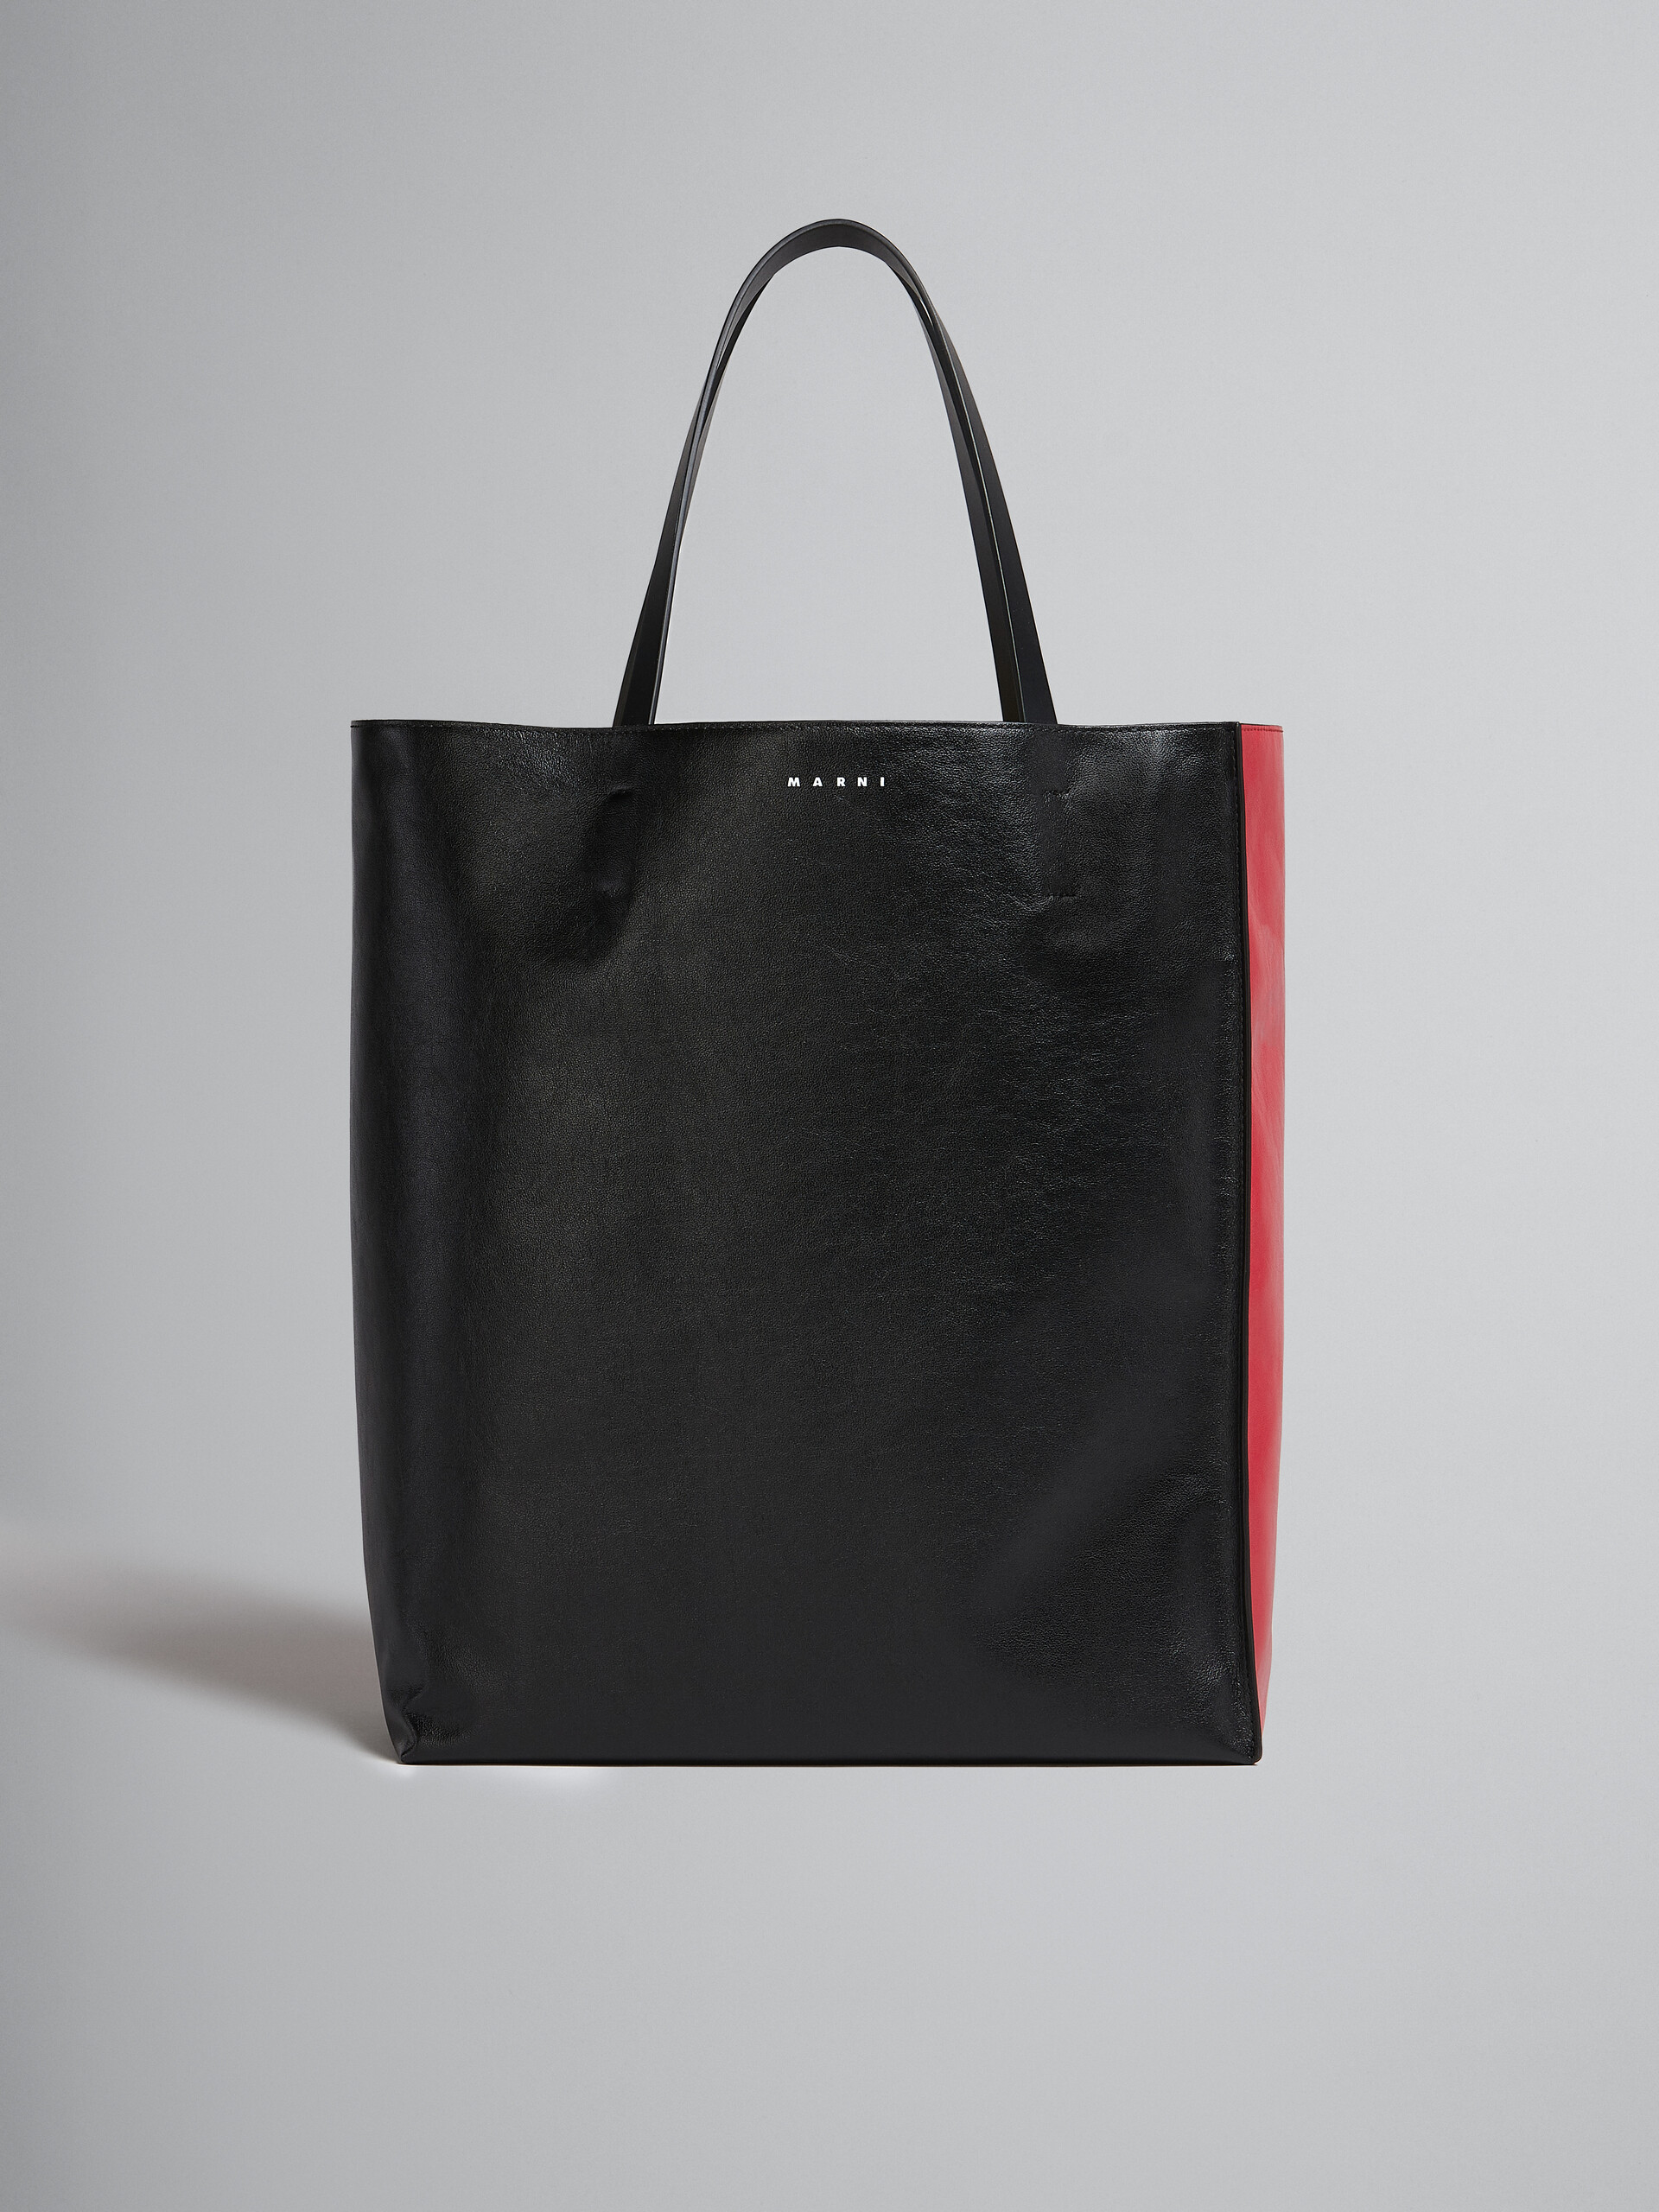 Museo Soft Large bag in black and red shiny leather - Shopping Bags - Image 1